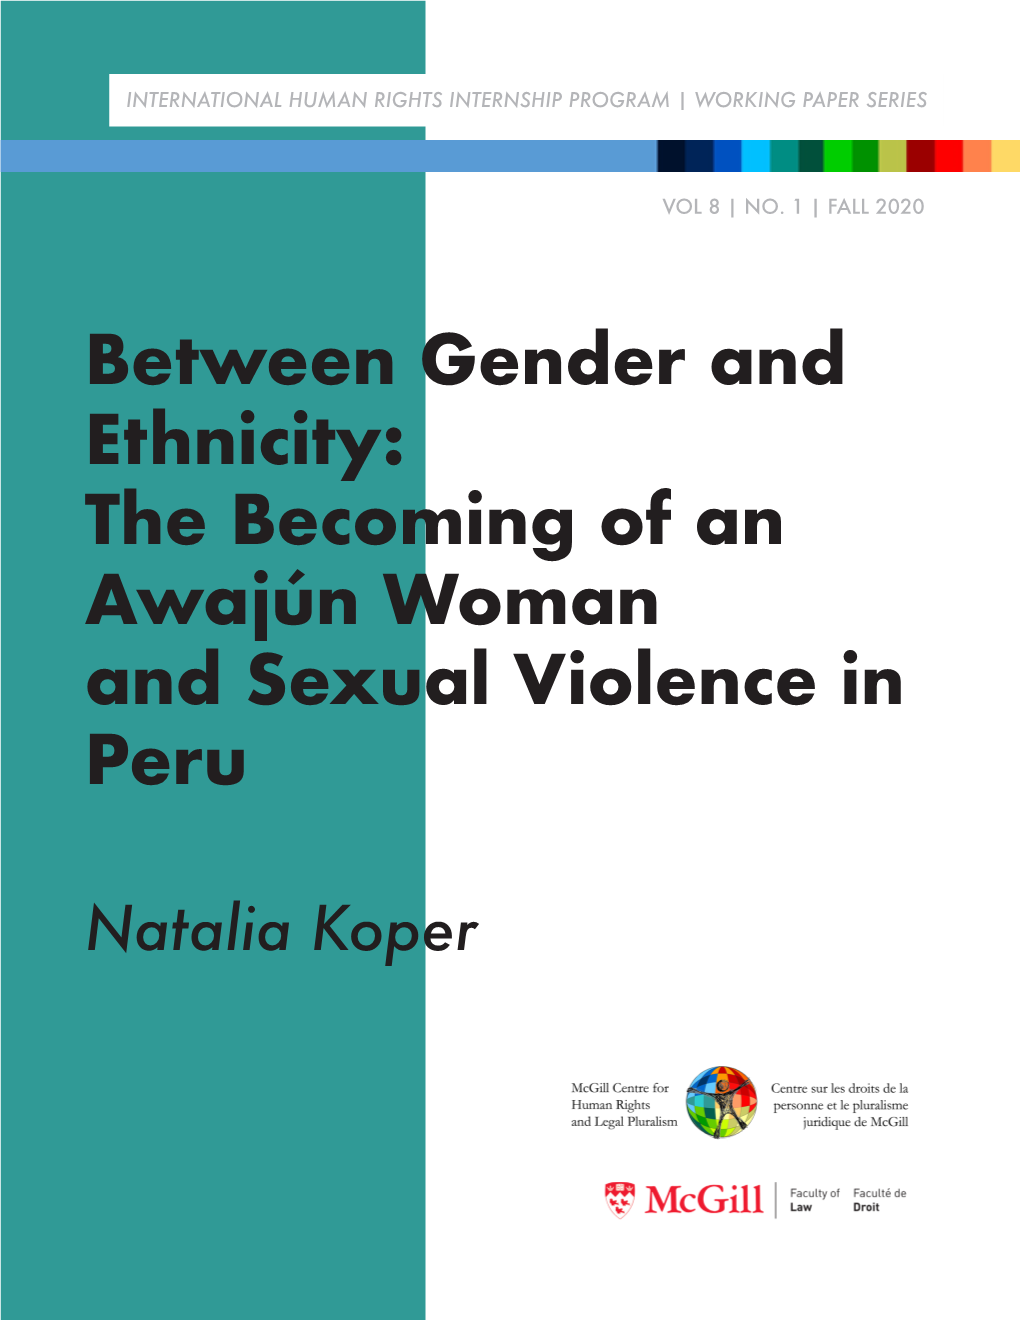 Between Gender and Ethnicity: the Becoming of an Awajún Woman and Sexual Violence in Peru